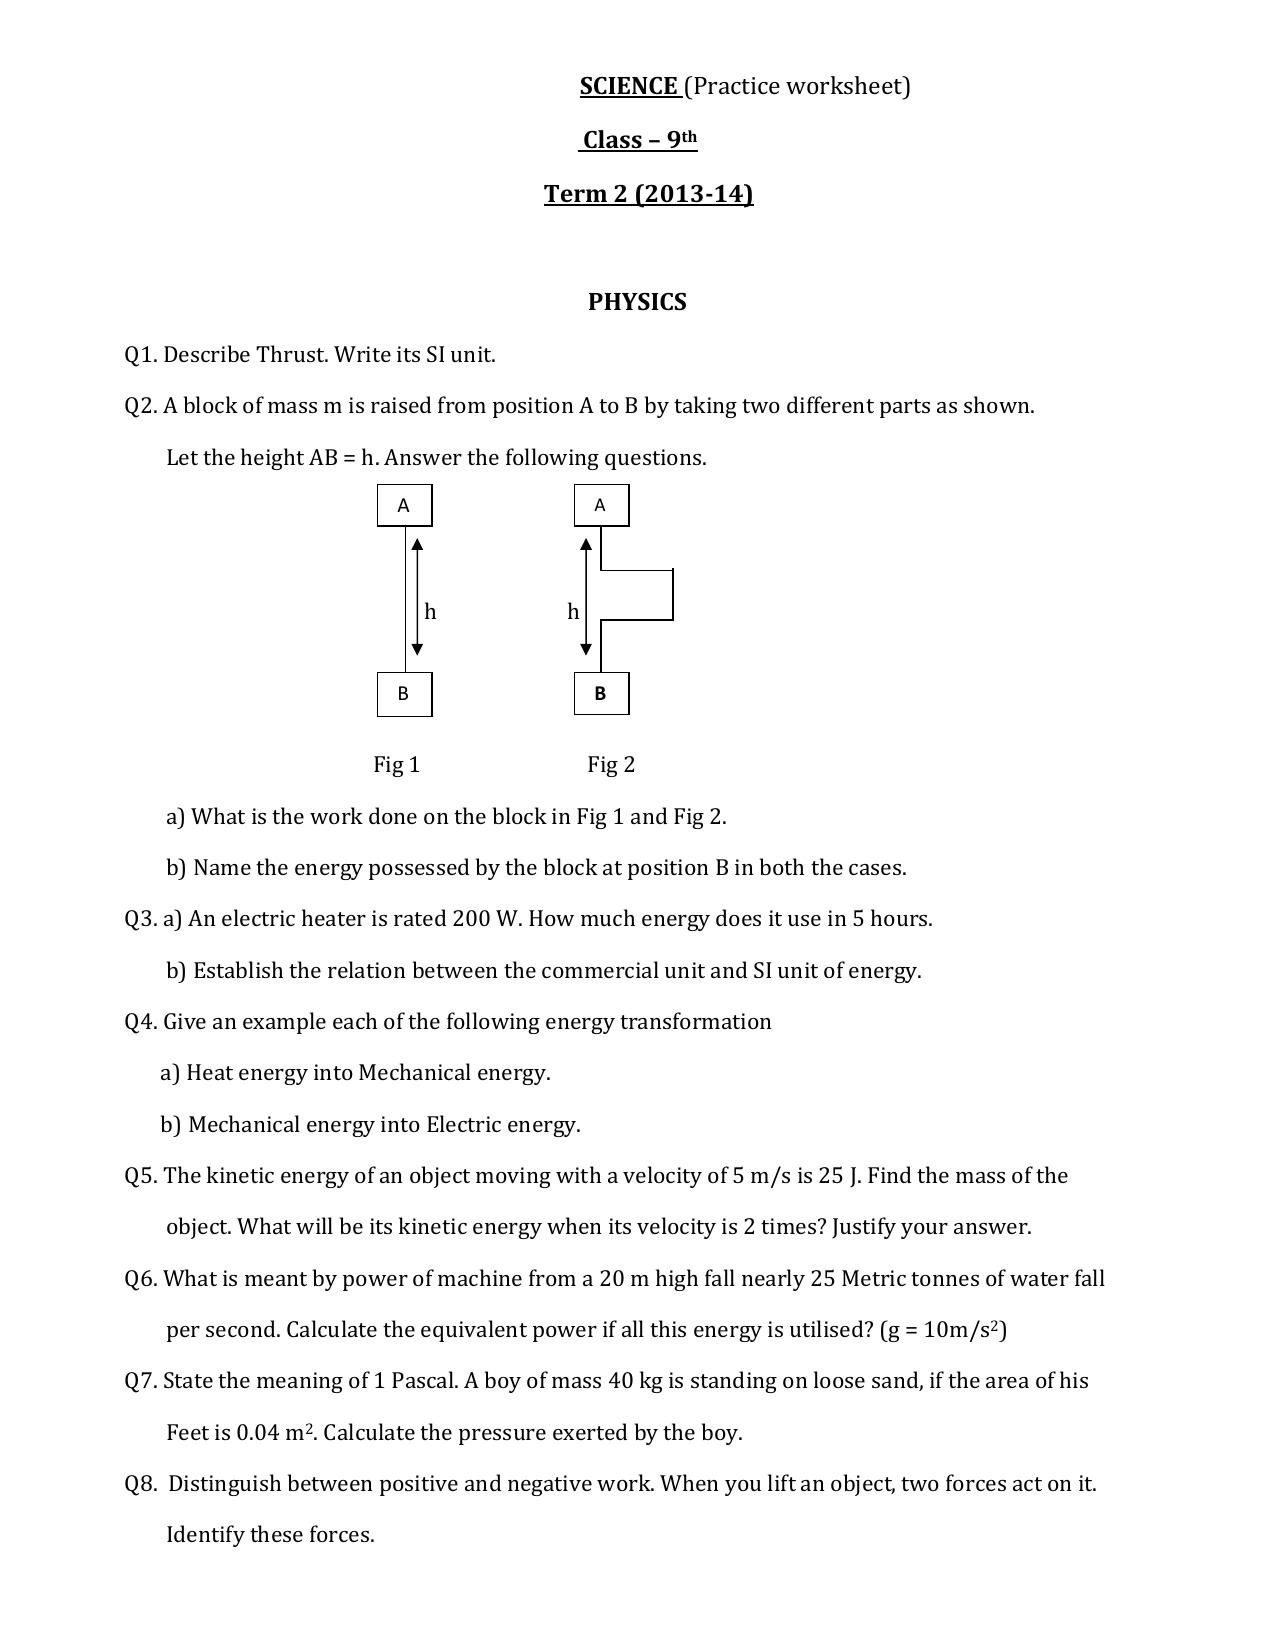 CBSE Worksheets for Class 9 Science Assignment 9 - Page 1